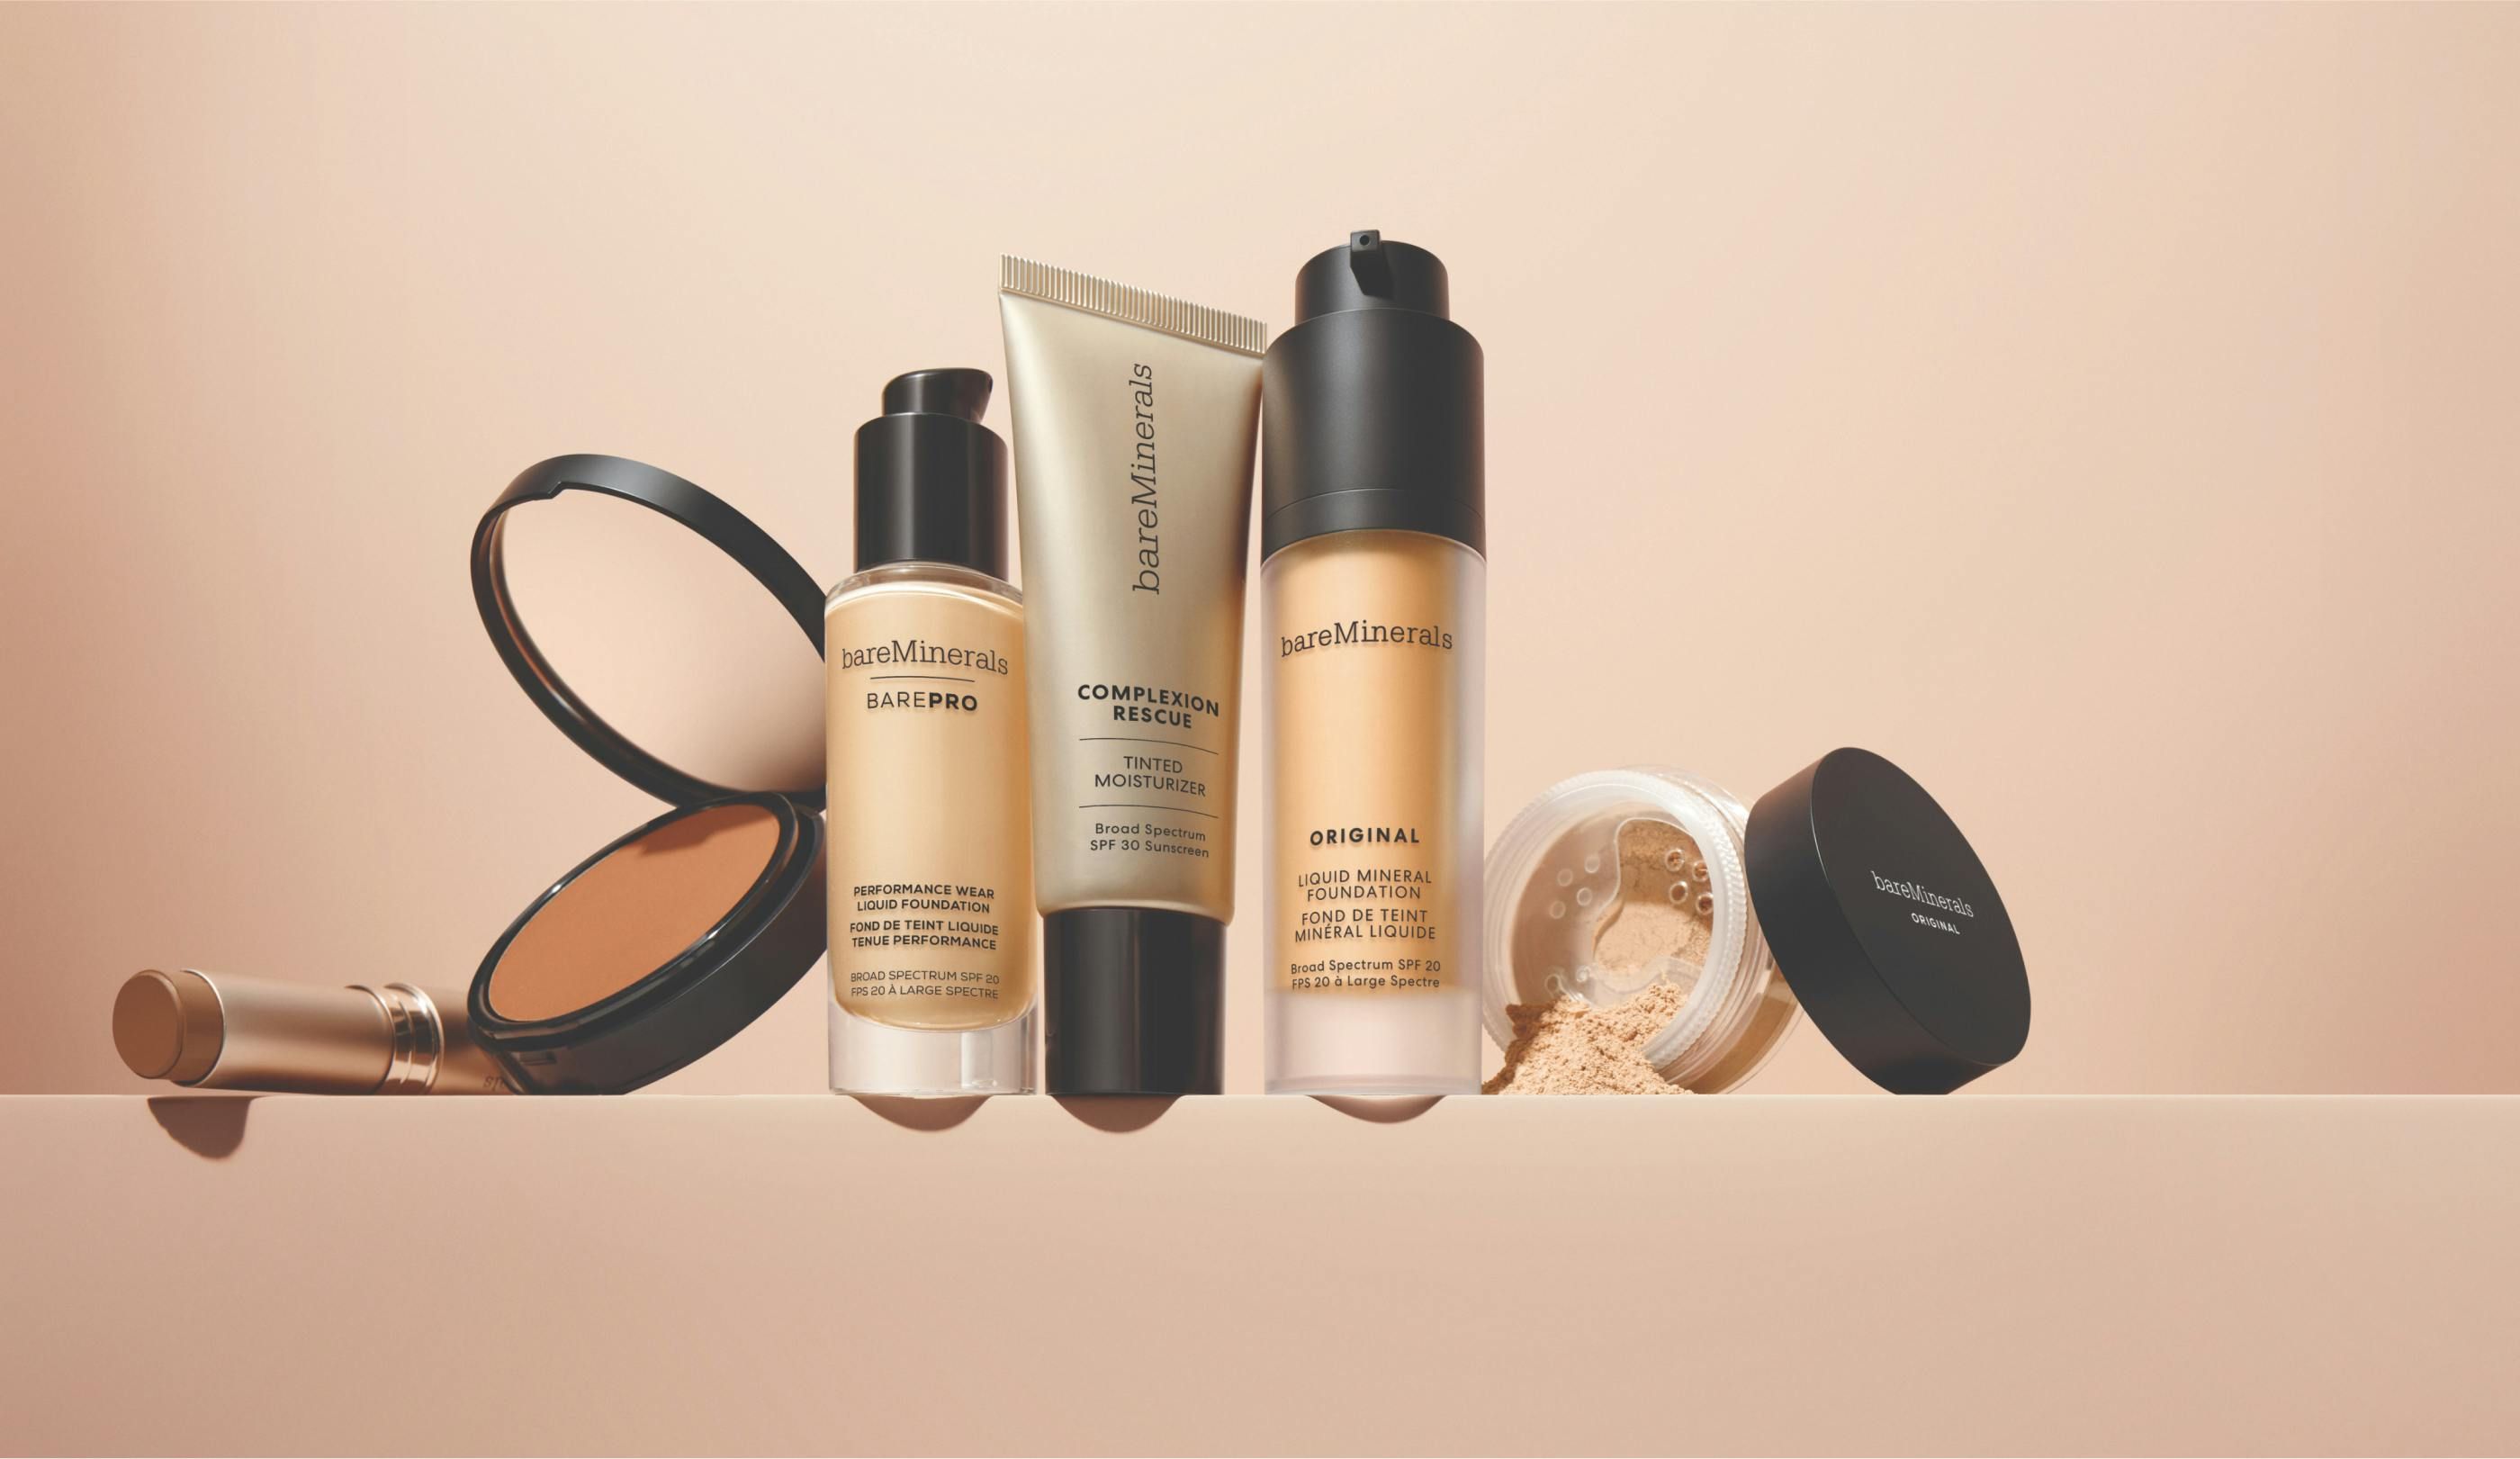 Still life photo of various bareMinerals beauty products